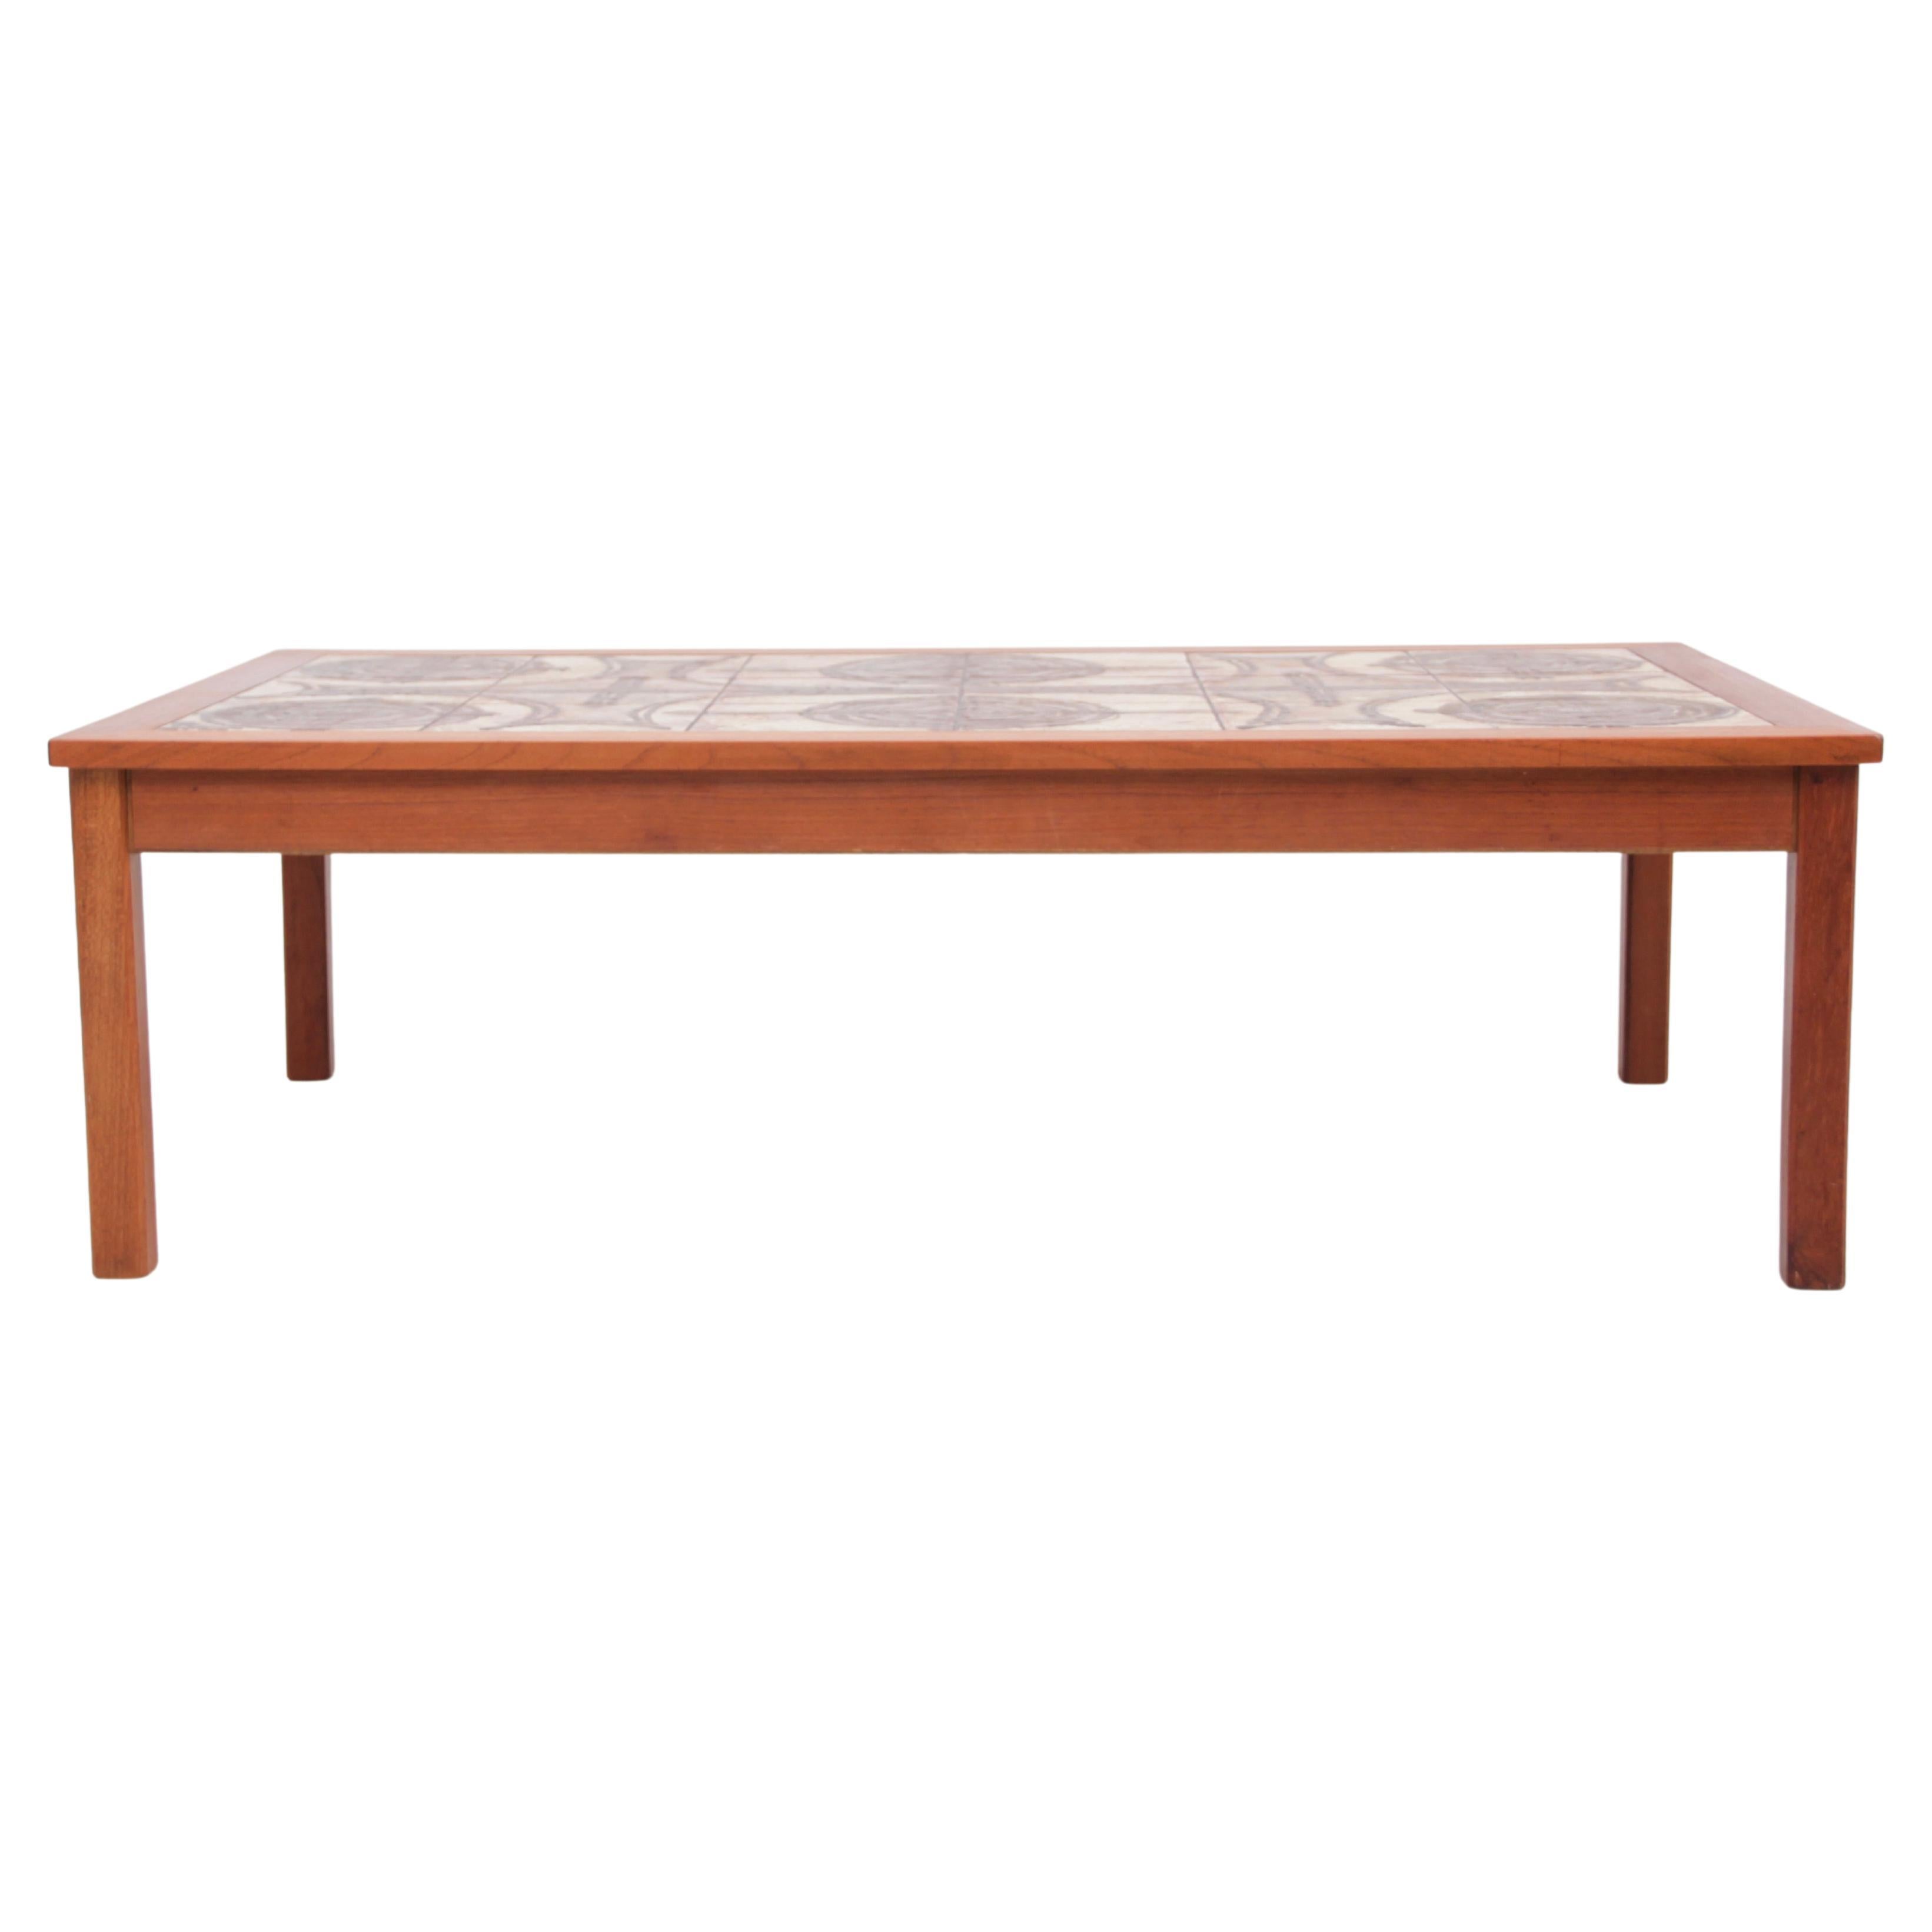 Mid century modern scandinavian coffe table with ceramic tiles For Sale